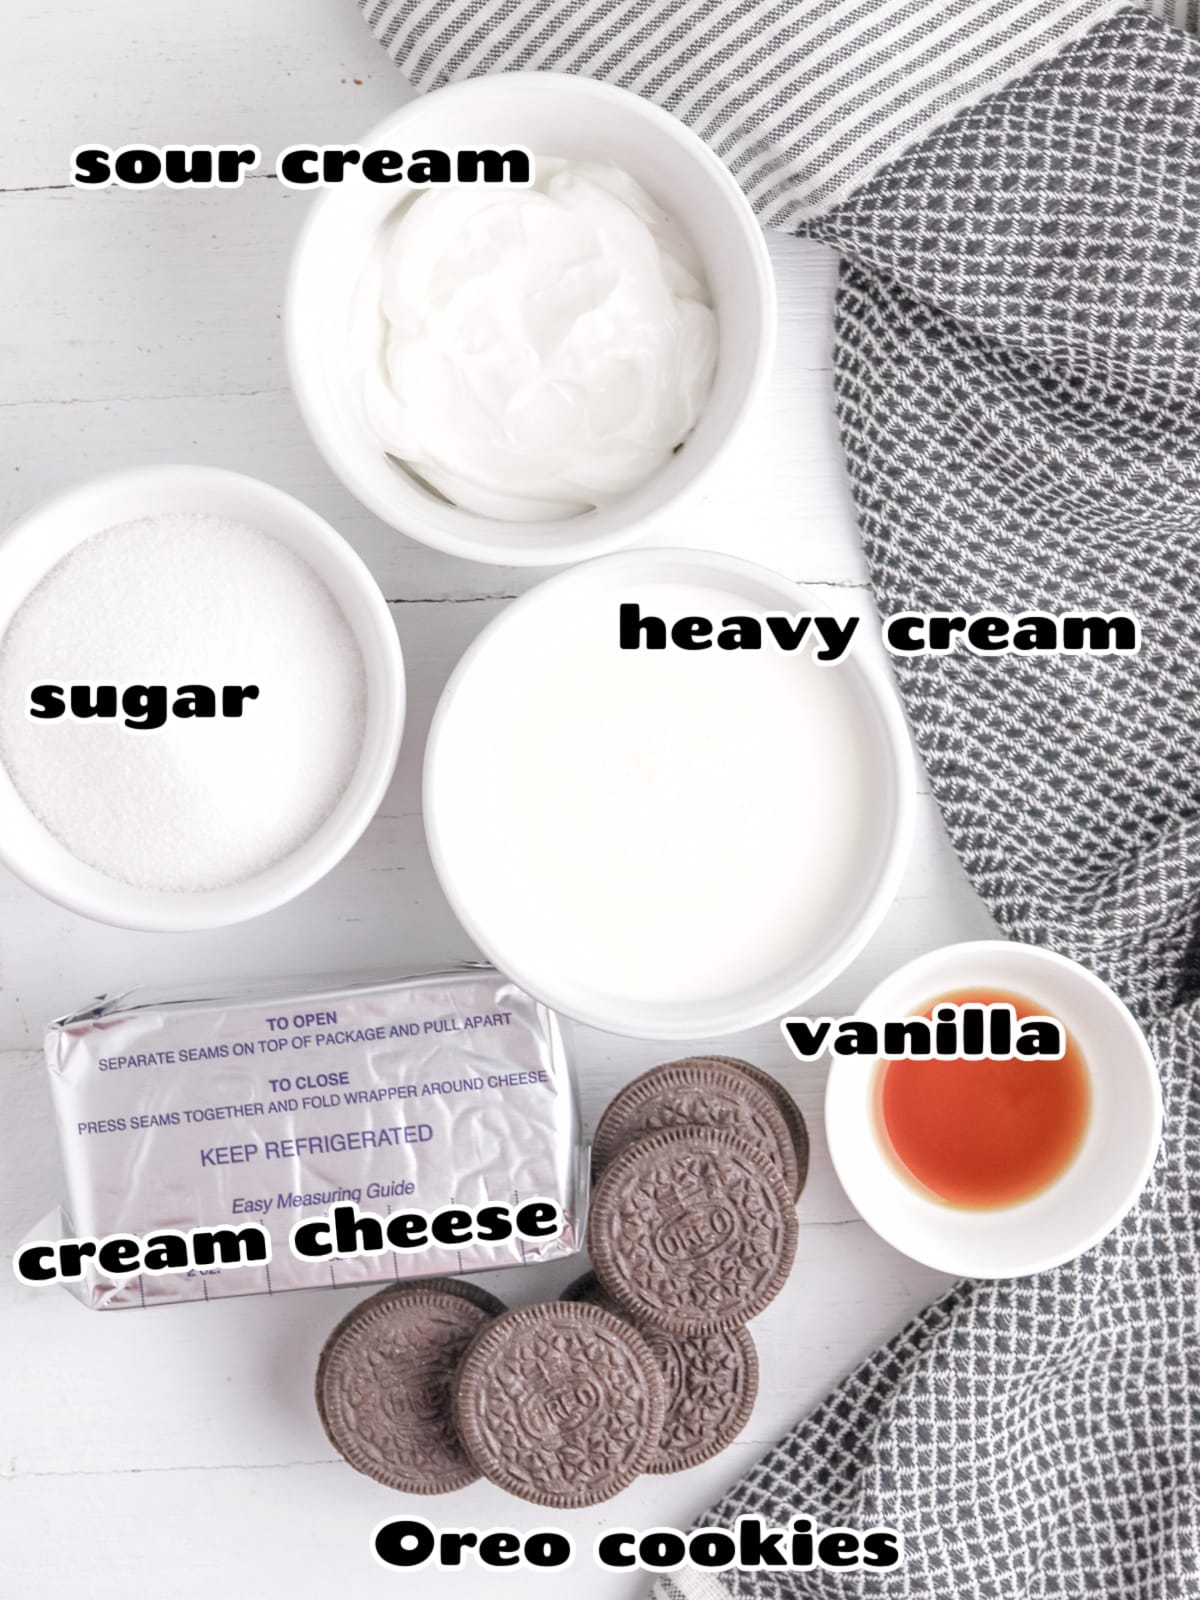 Oreo cheesecake dip ingredients with labels